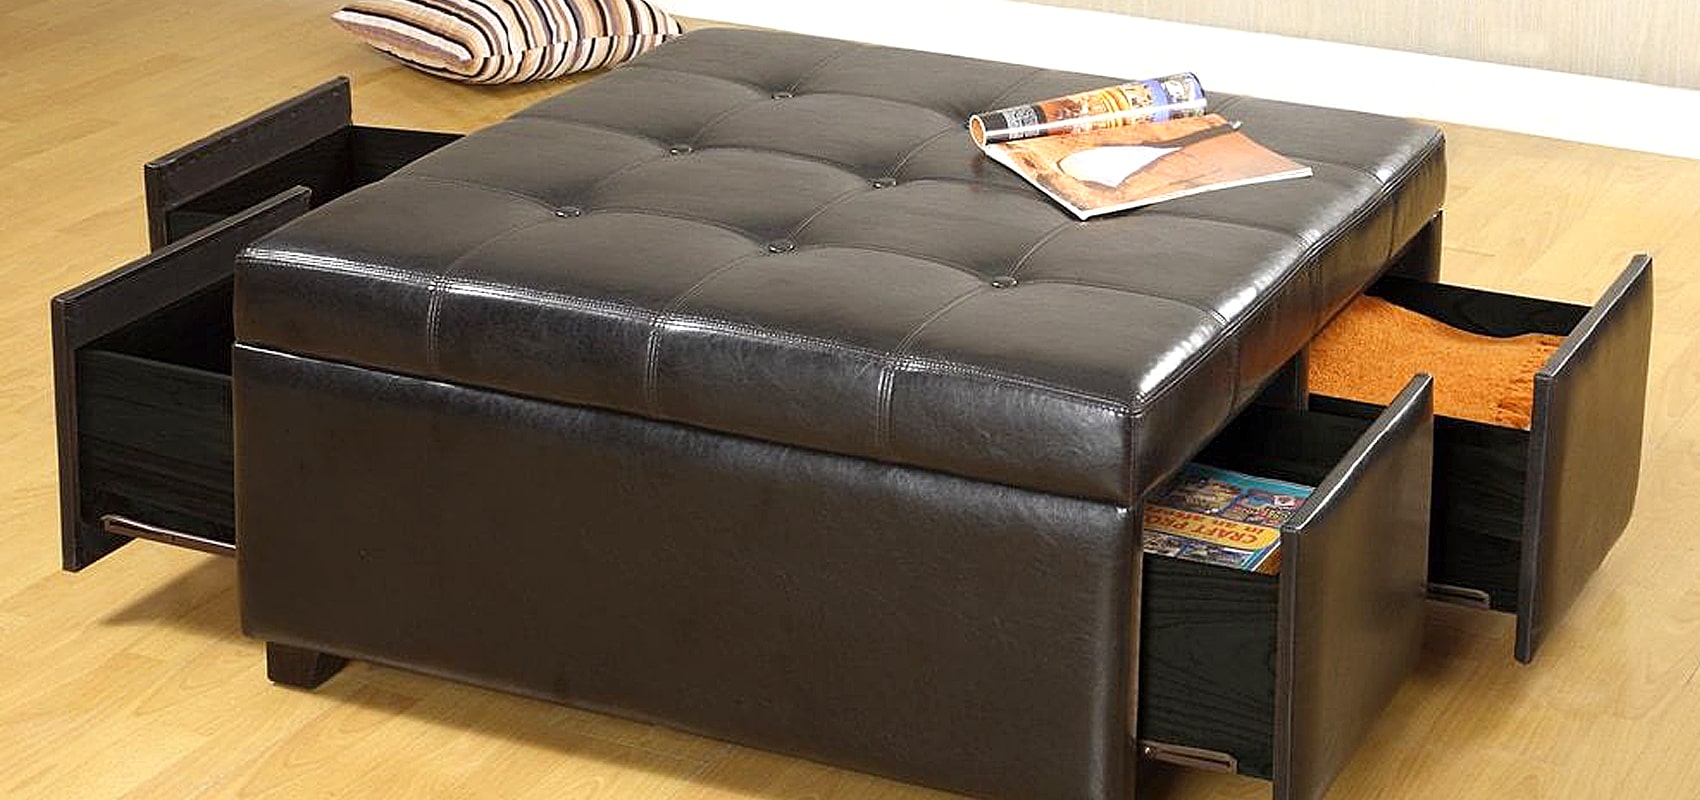 Large Ottoman with Storage